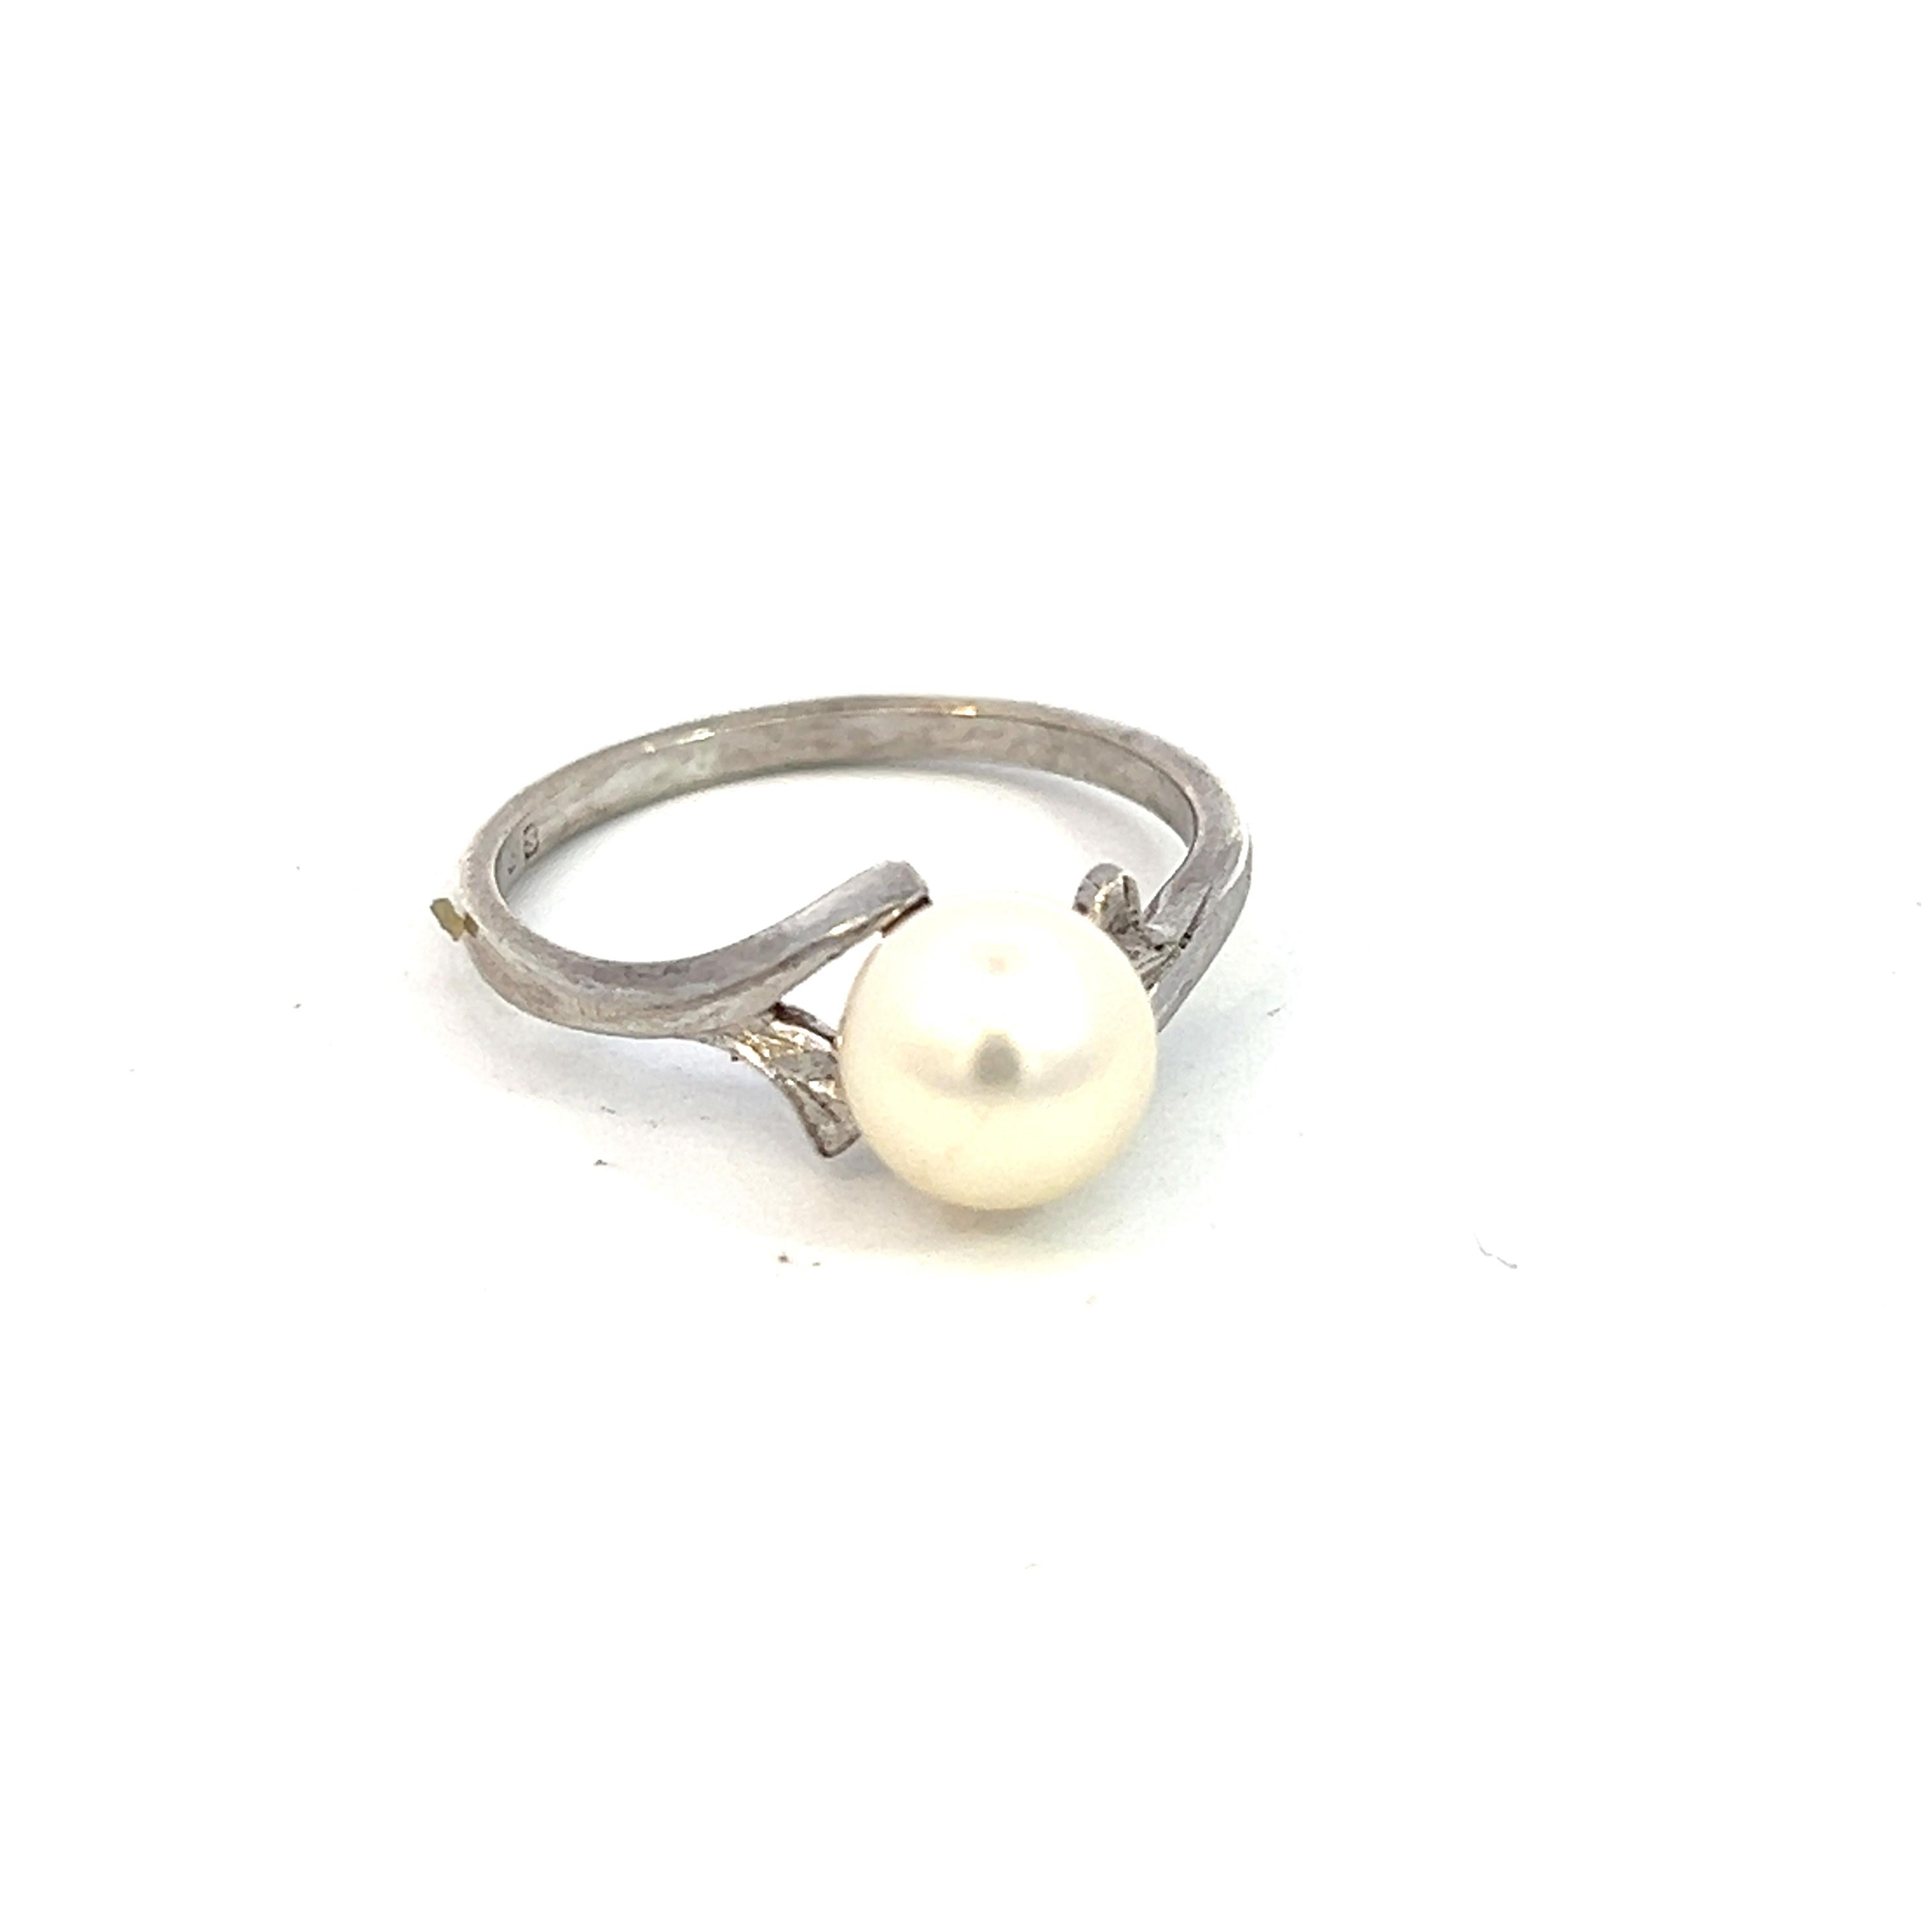 Mikimoto Estate Akoya Pearl Ring Size 7 Sterling Silver 7.30 mm M371

TRUSTED SELLER SINCE 2002

PLEASE SEE OUR HUNDREDS OF POSITIVE FEEDBACKS FROM OUR CLIENTS!!

FREE SHIPPING

This elegant Authentic Mikimoto sterling silver ring has 1 Saltwater